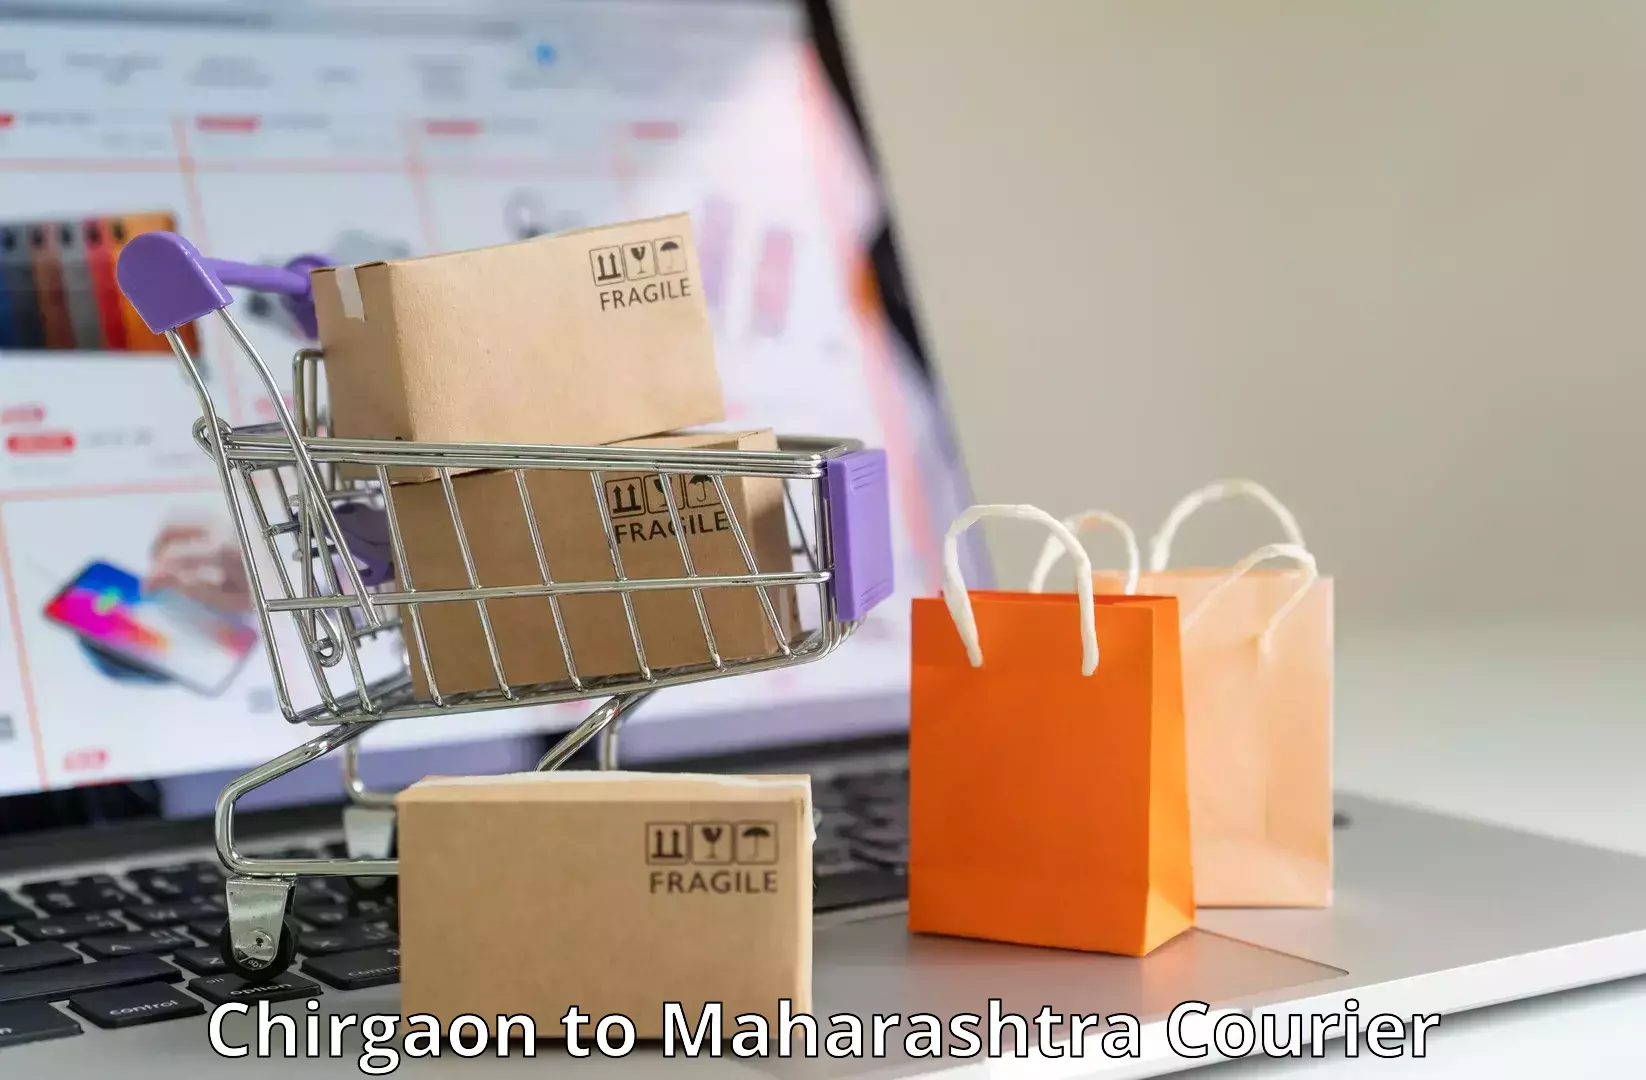 Speedy delivery service in Chirgaon to Sangli